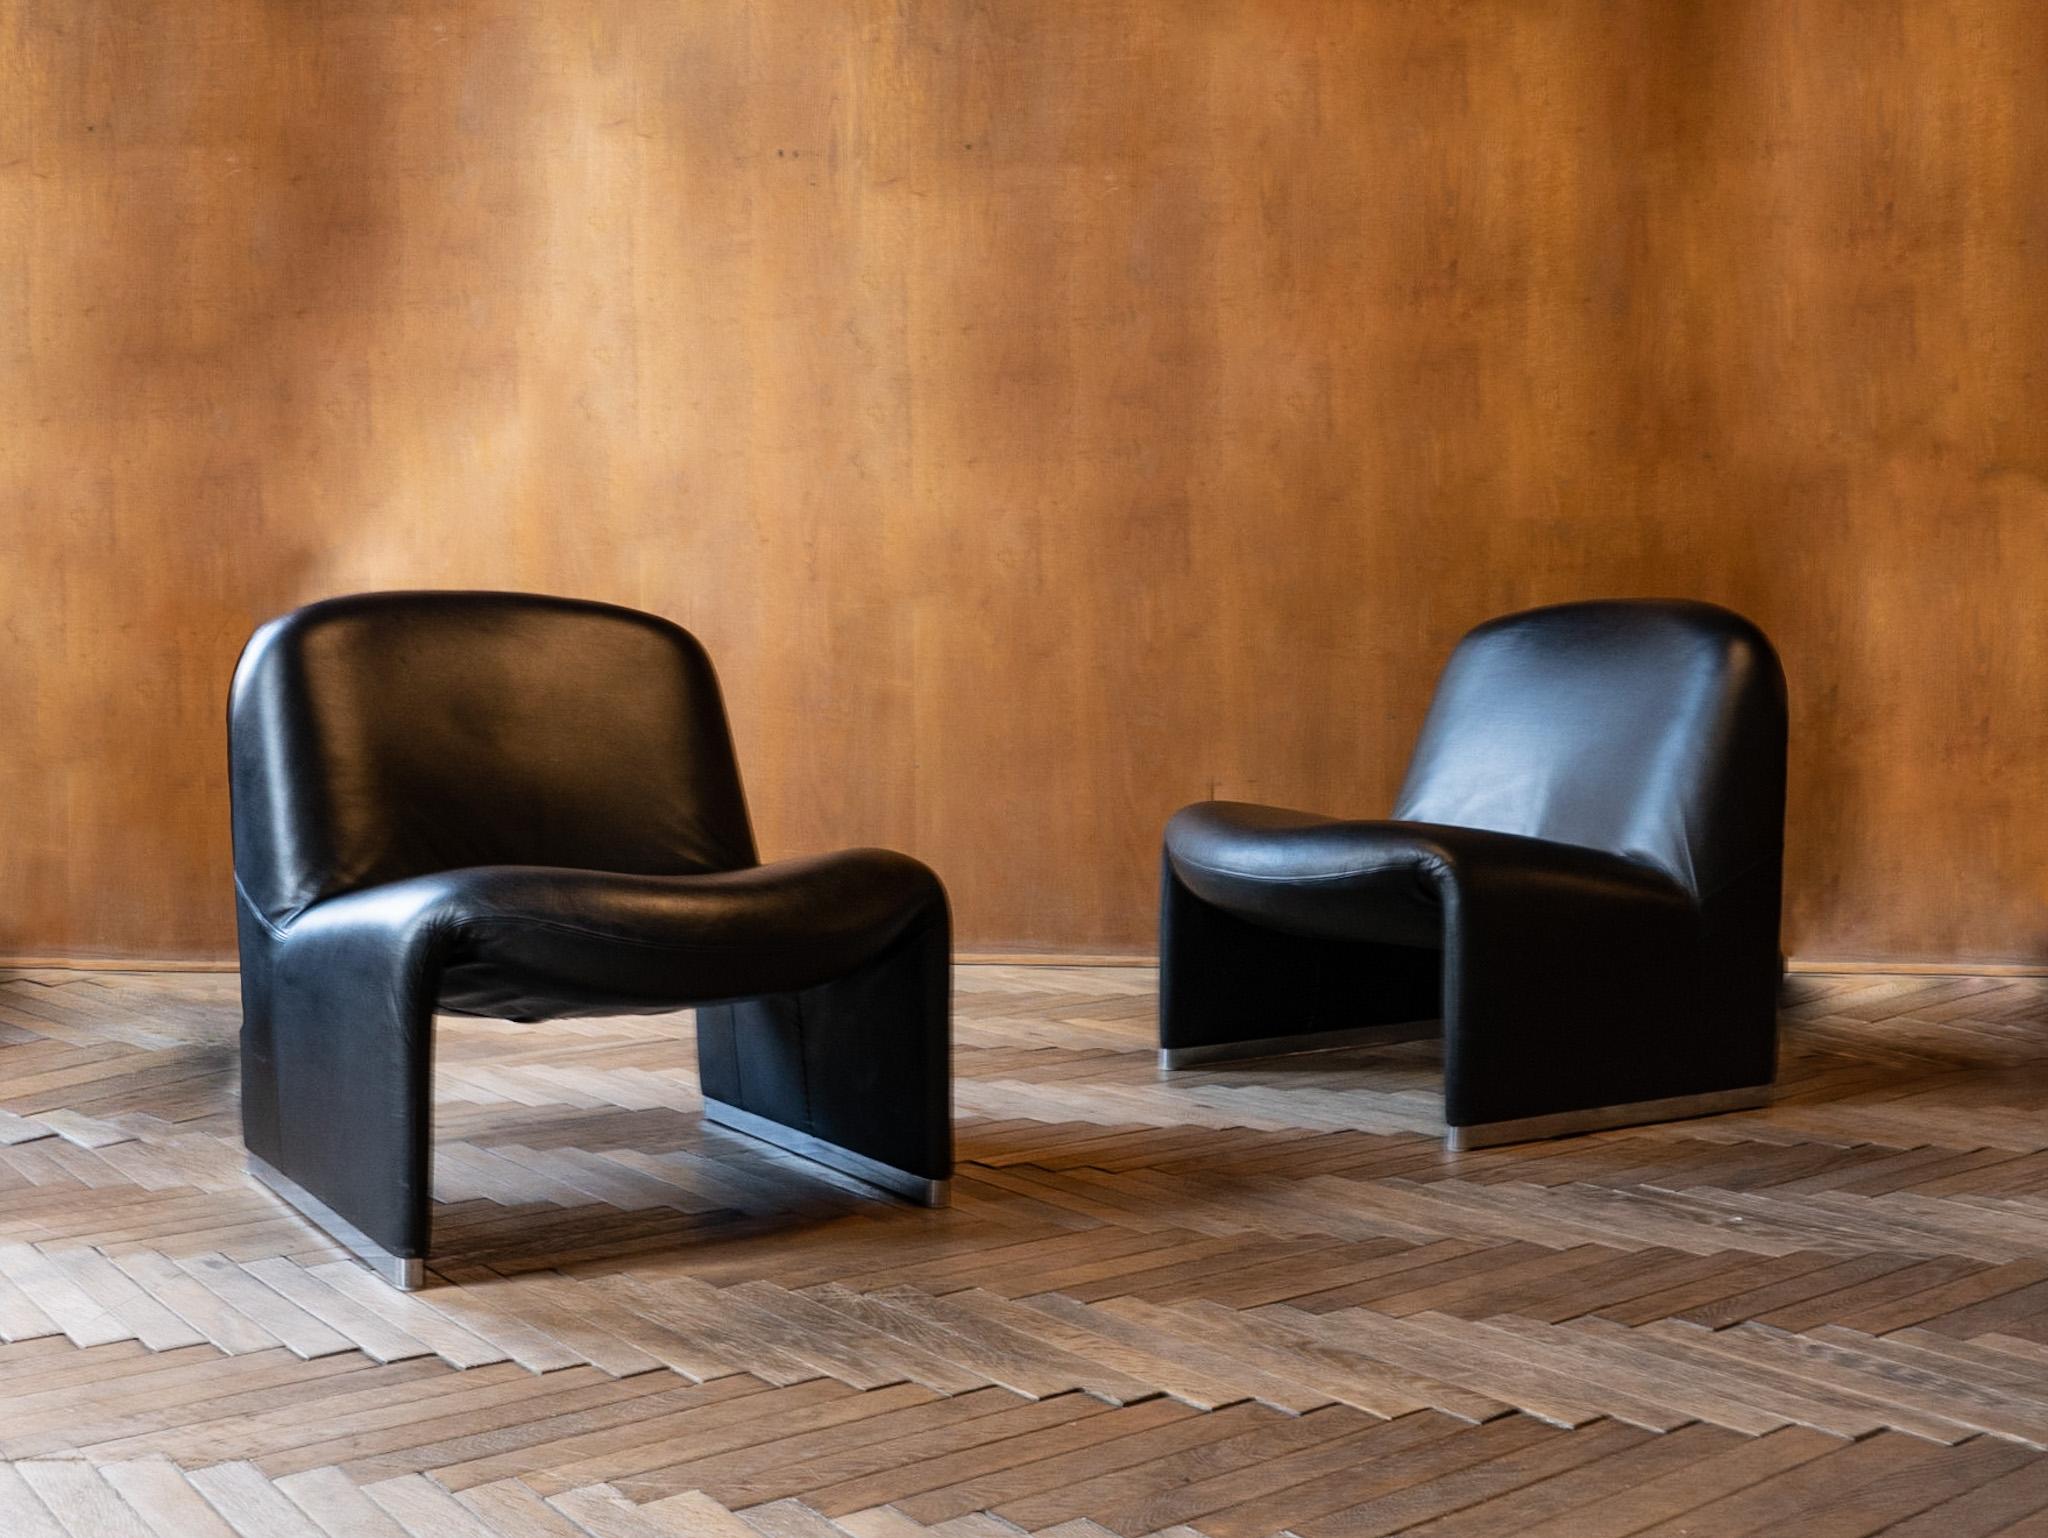 Mid-Century Modern Black Leather Alky Chairs by Giancarlo Piretti, Italy 1970s.

This set of 2 black Alky chairs in original leather upholstery were designed by Giancarlo Piretti for Castelli in the 70s.

The Alky chair is a stunning example of